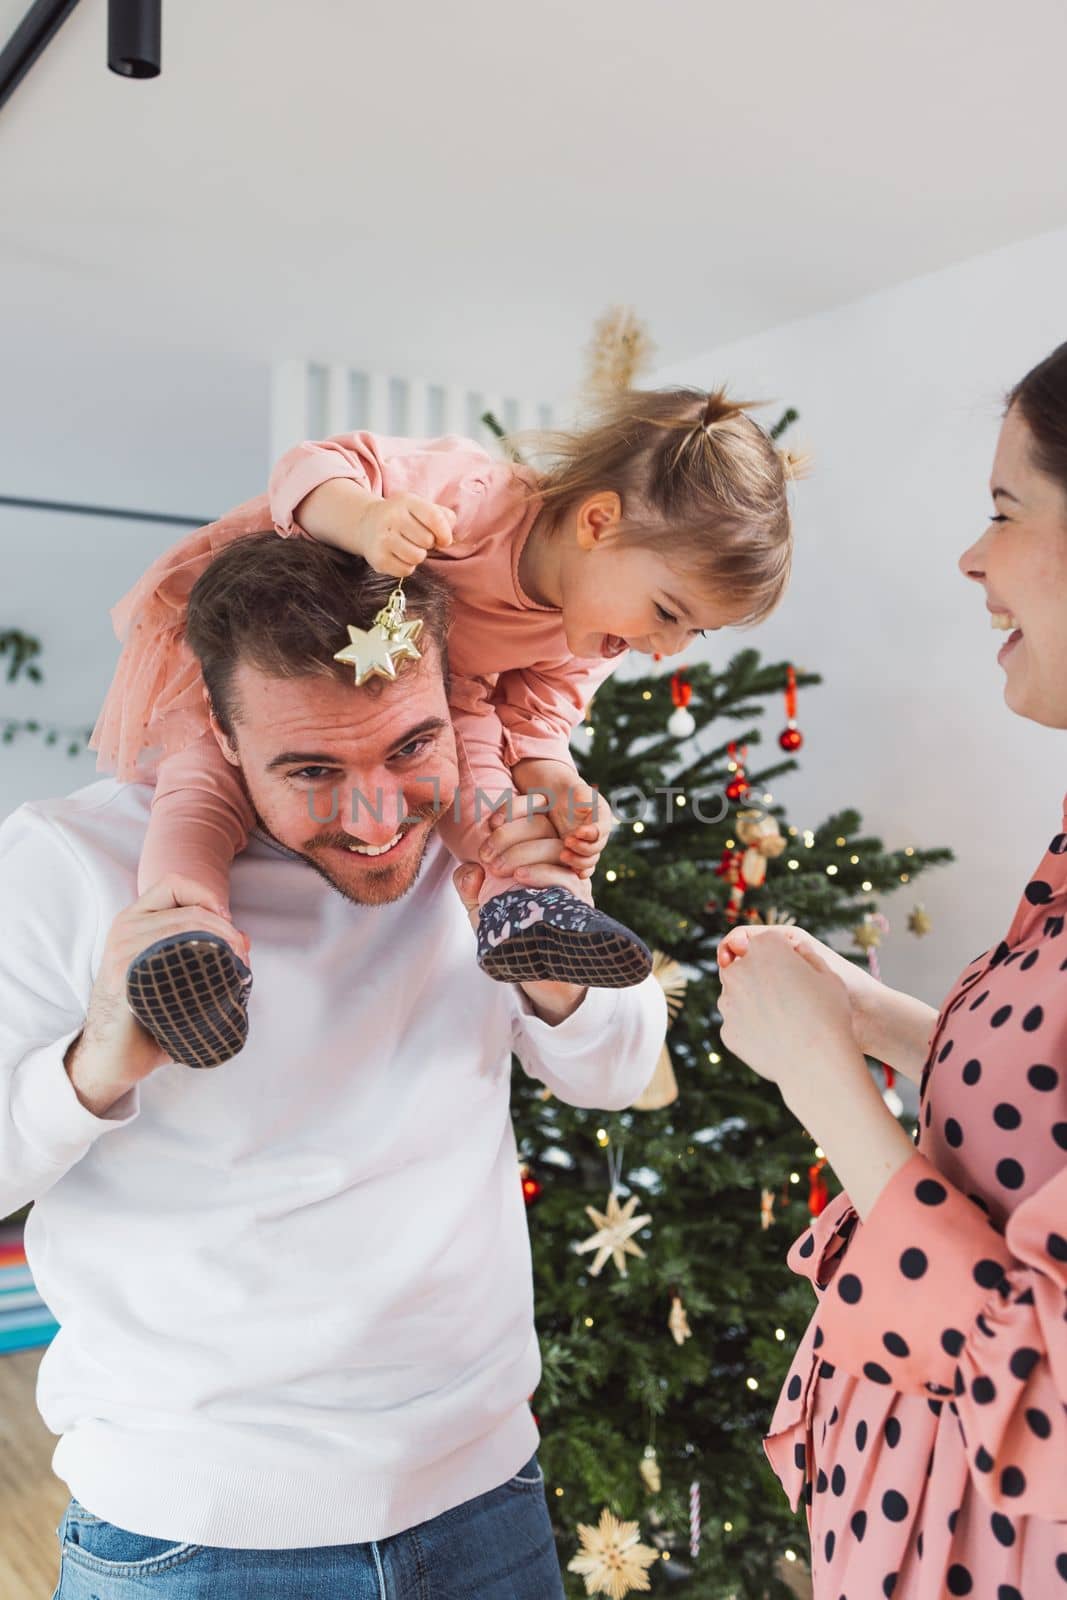 Dad carrying little girl on his shoulders smiling, while mom stands at the side looking at them - Family having fun on Christmas by VisualProductions